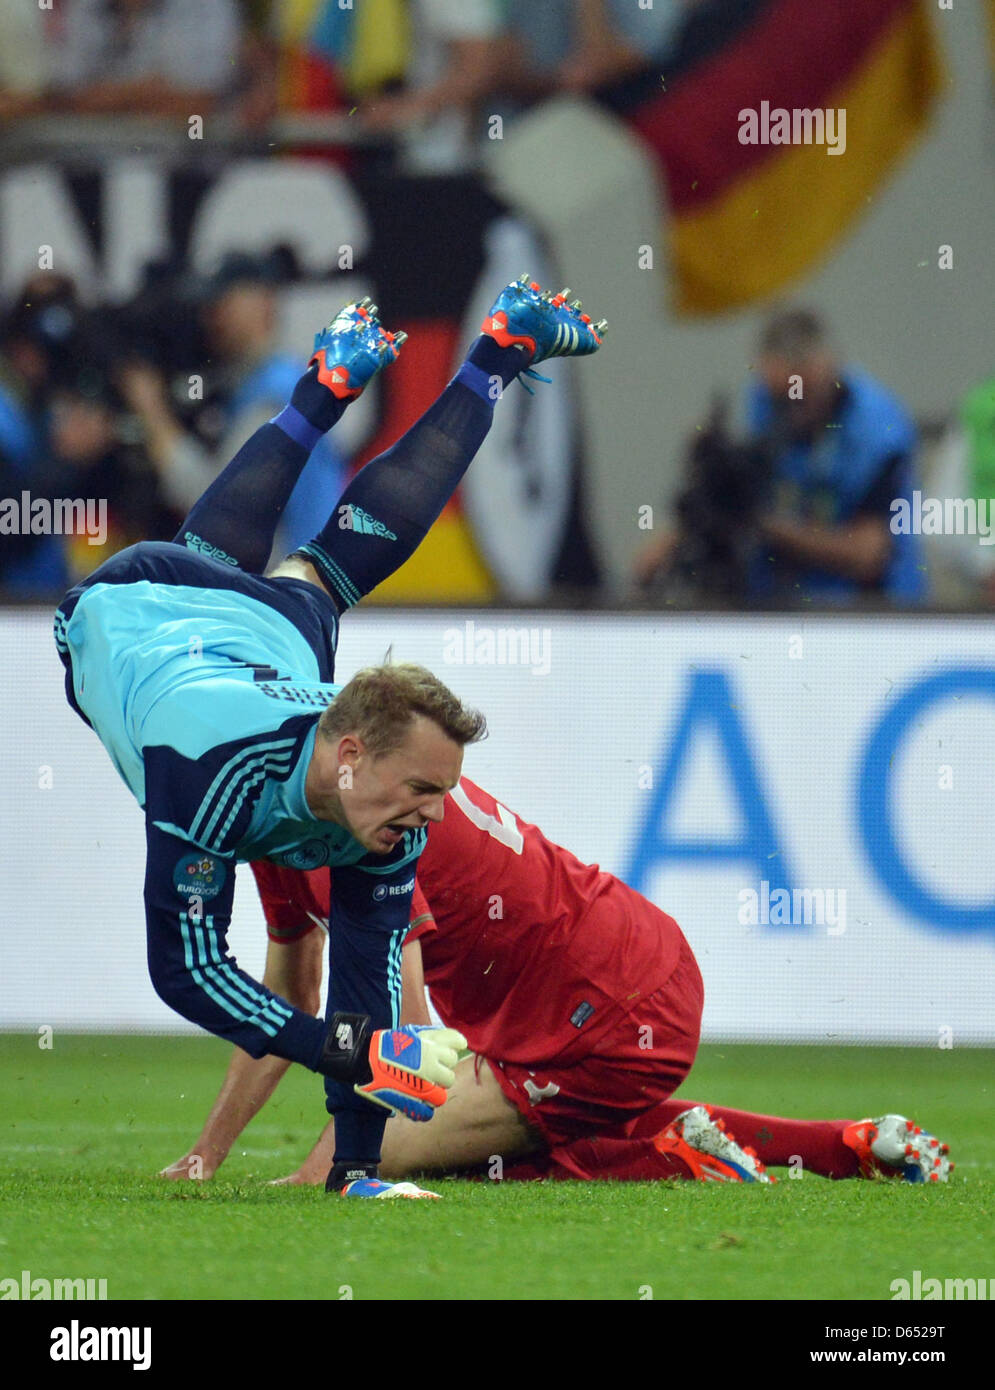 Germany's Manuel Neuer (top) and Portugal's Helder Postiga vie for the ball during UEFA EURO 2012 group B soccer match Germany vs Portugal at Arena Lviv in Lviv, the Ukraine, 09 June 2012. Photo: Thomas Eisenhuth dpa (Please refer to chapters 7 and 8 of http://dpaq.de/Ziovh for UEFA Euro 2012 Terms & Conditions) Stock Photo